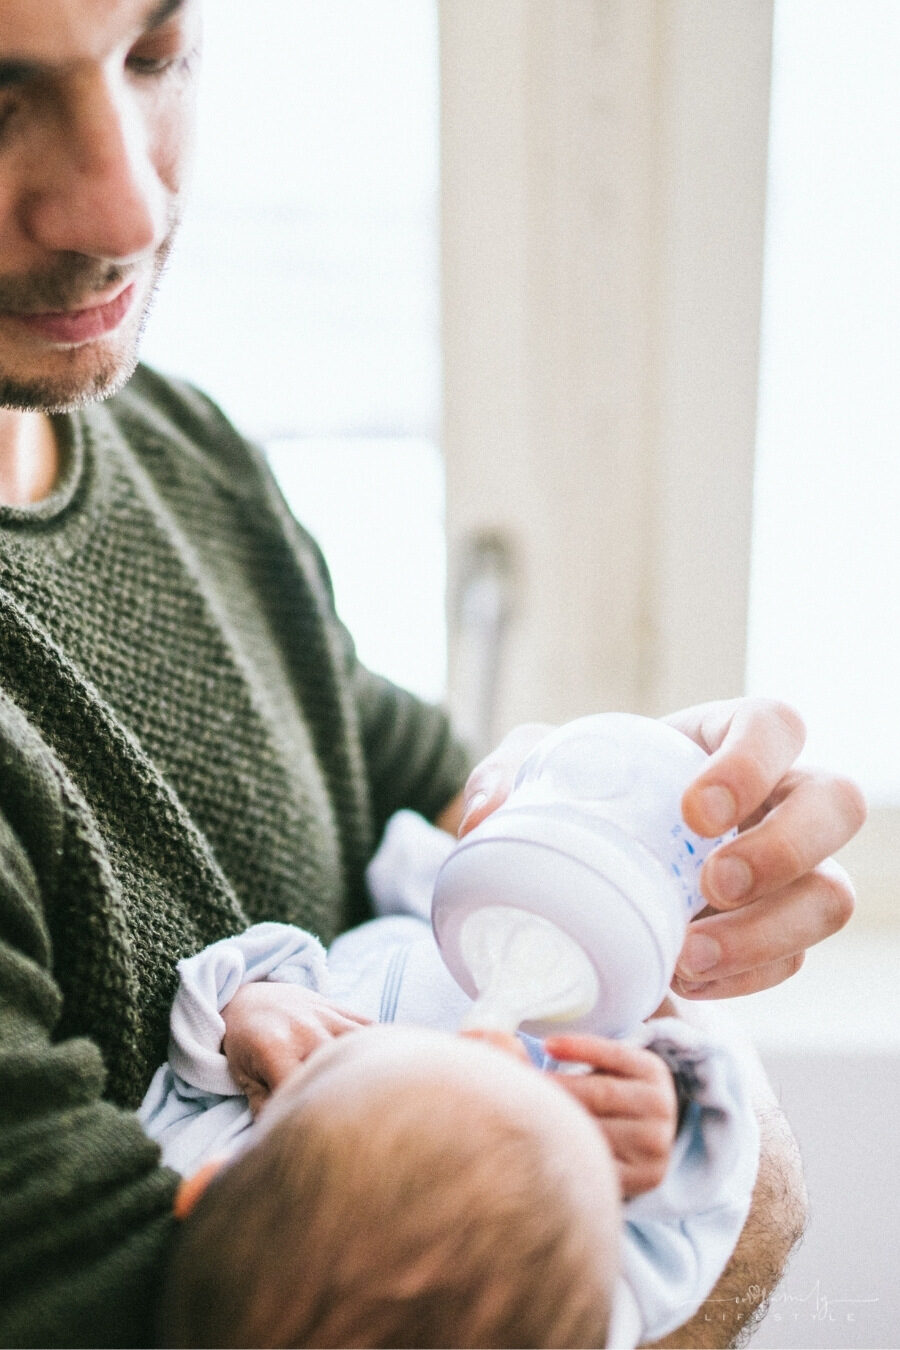 How Future Dads Prepare Themselves and Families For Baby Arrival